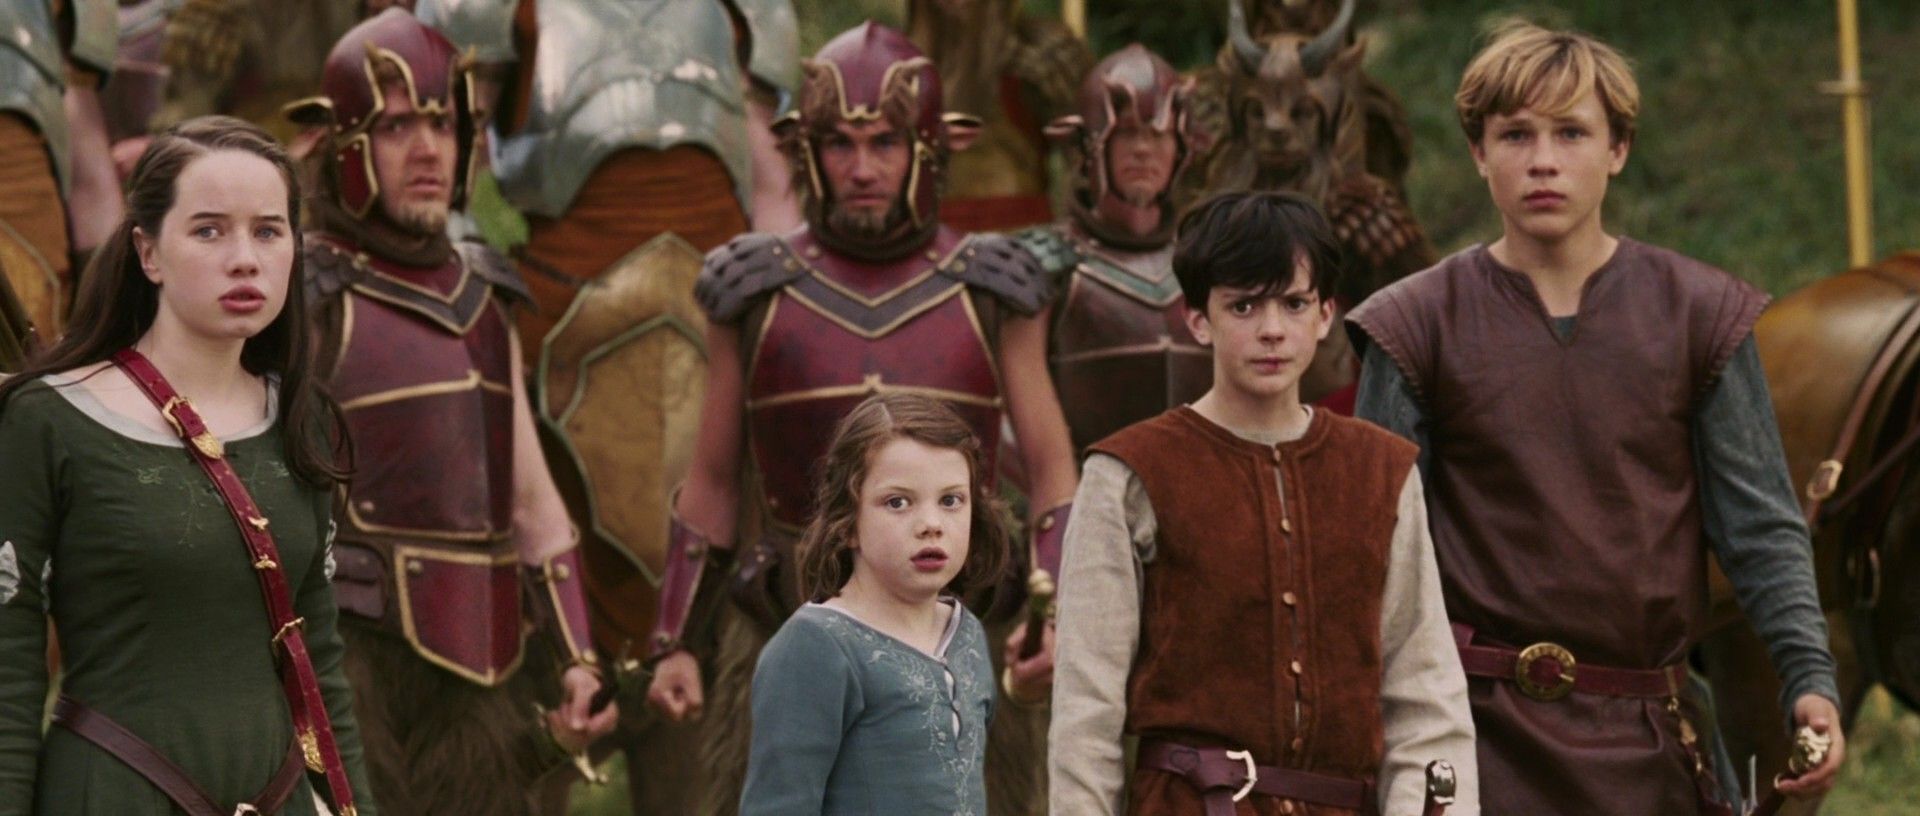 The Chronicles of Narnia: The Lion, The Witch & The Wardrobe Chronicles Of Narnia Image